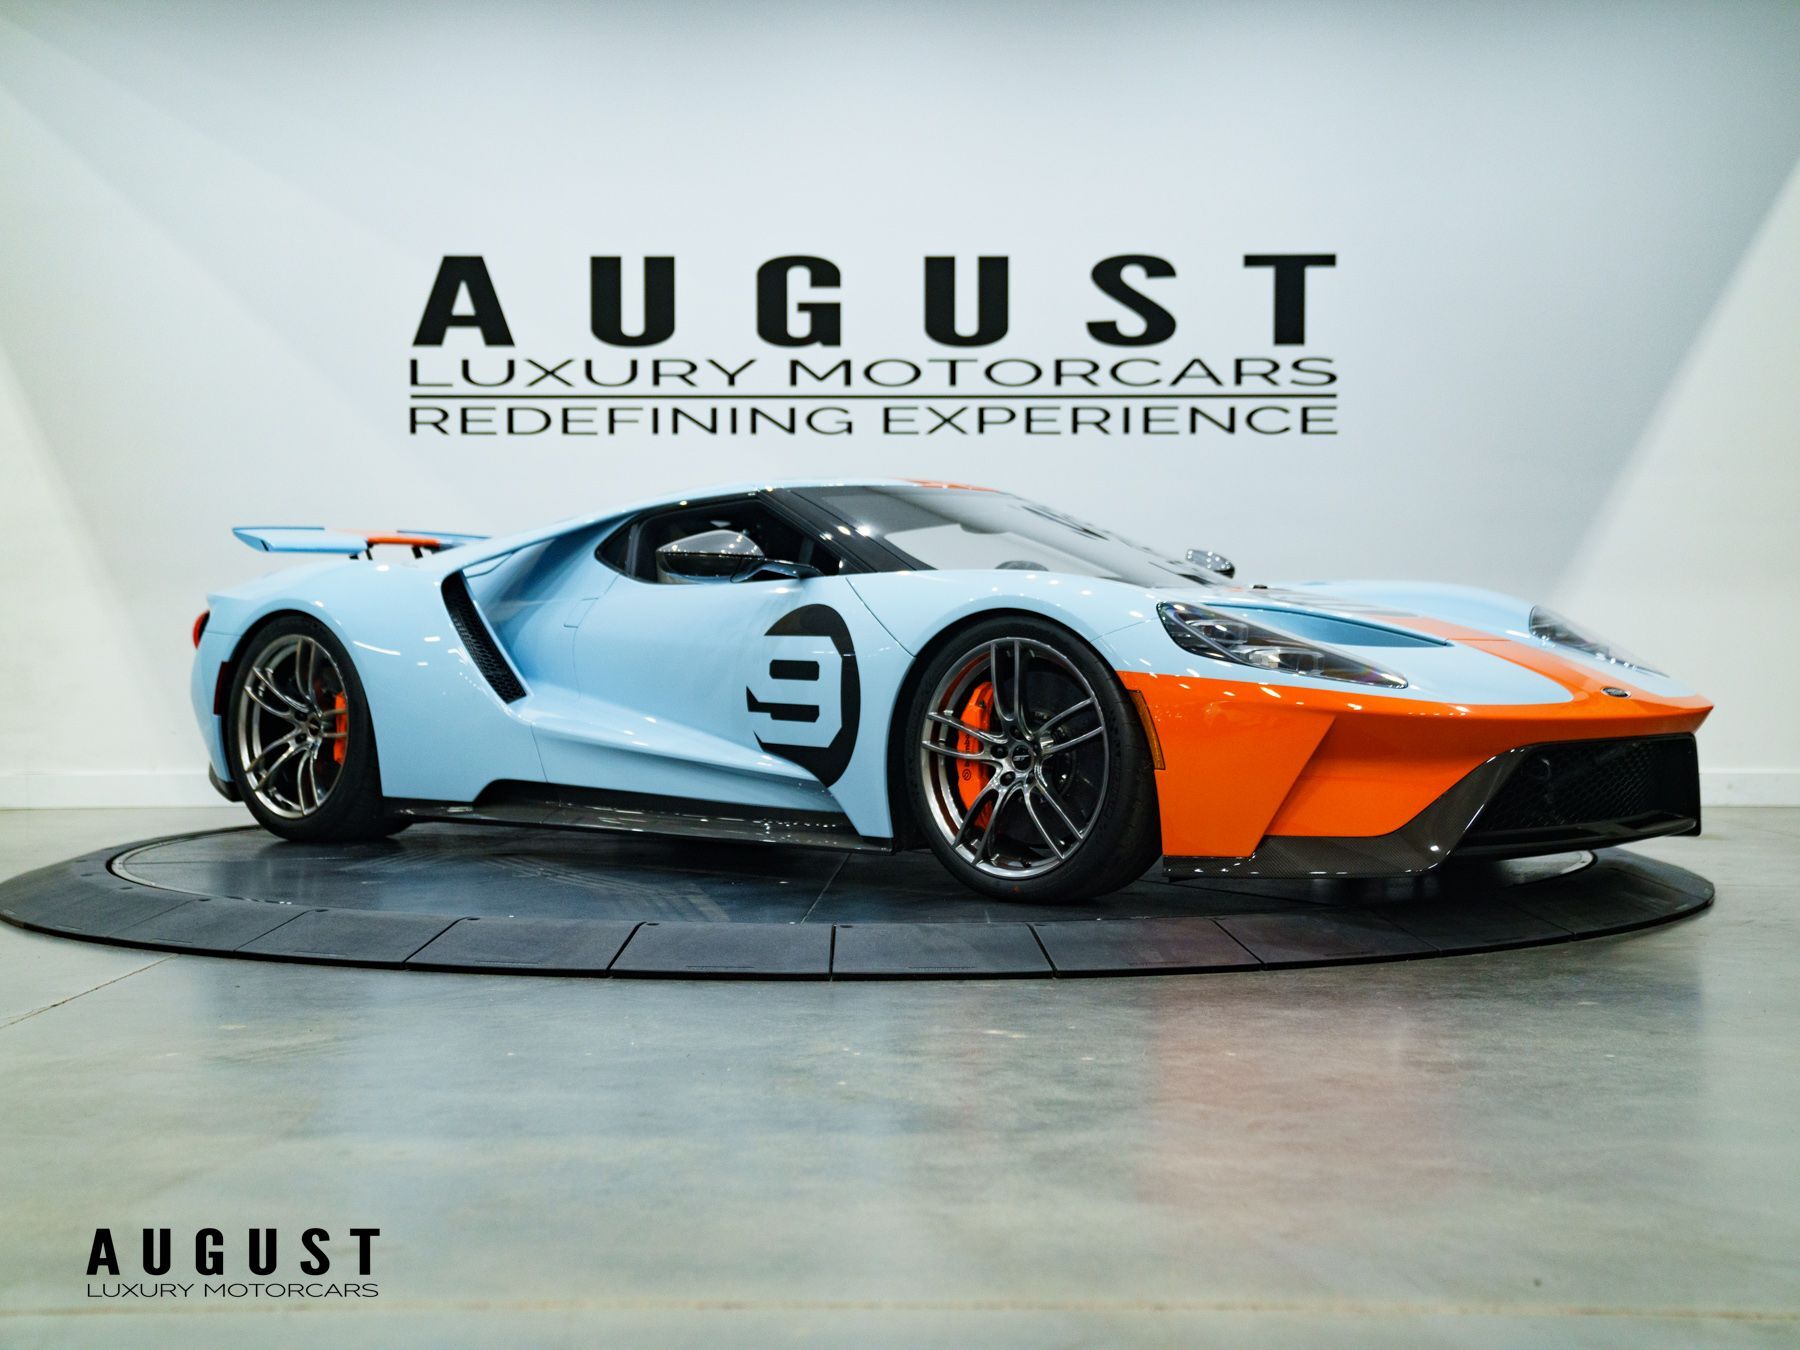 2019 Ford GT Heritage Edition 1 of only 50 made in 2019